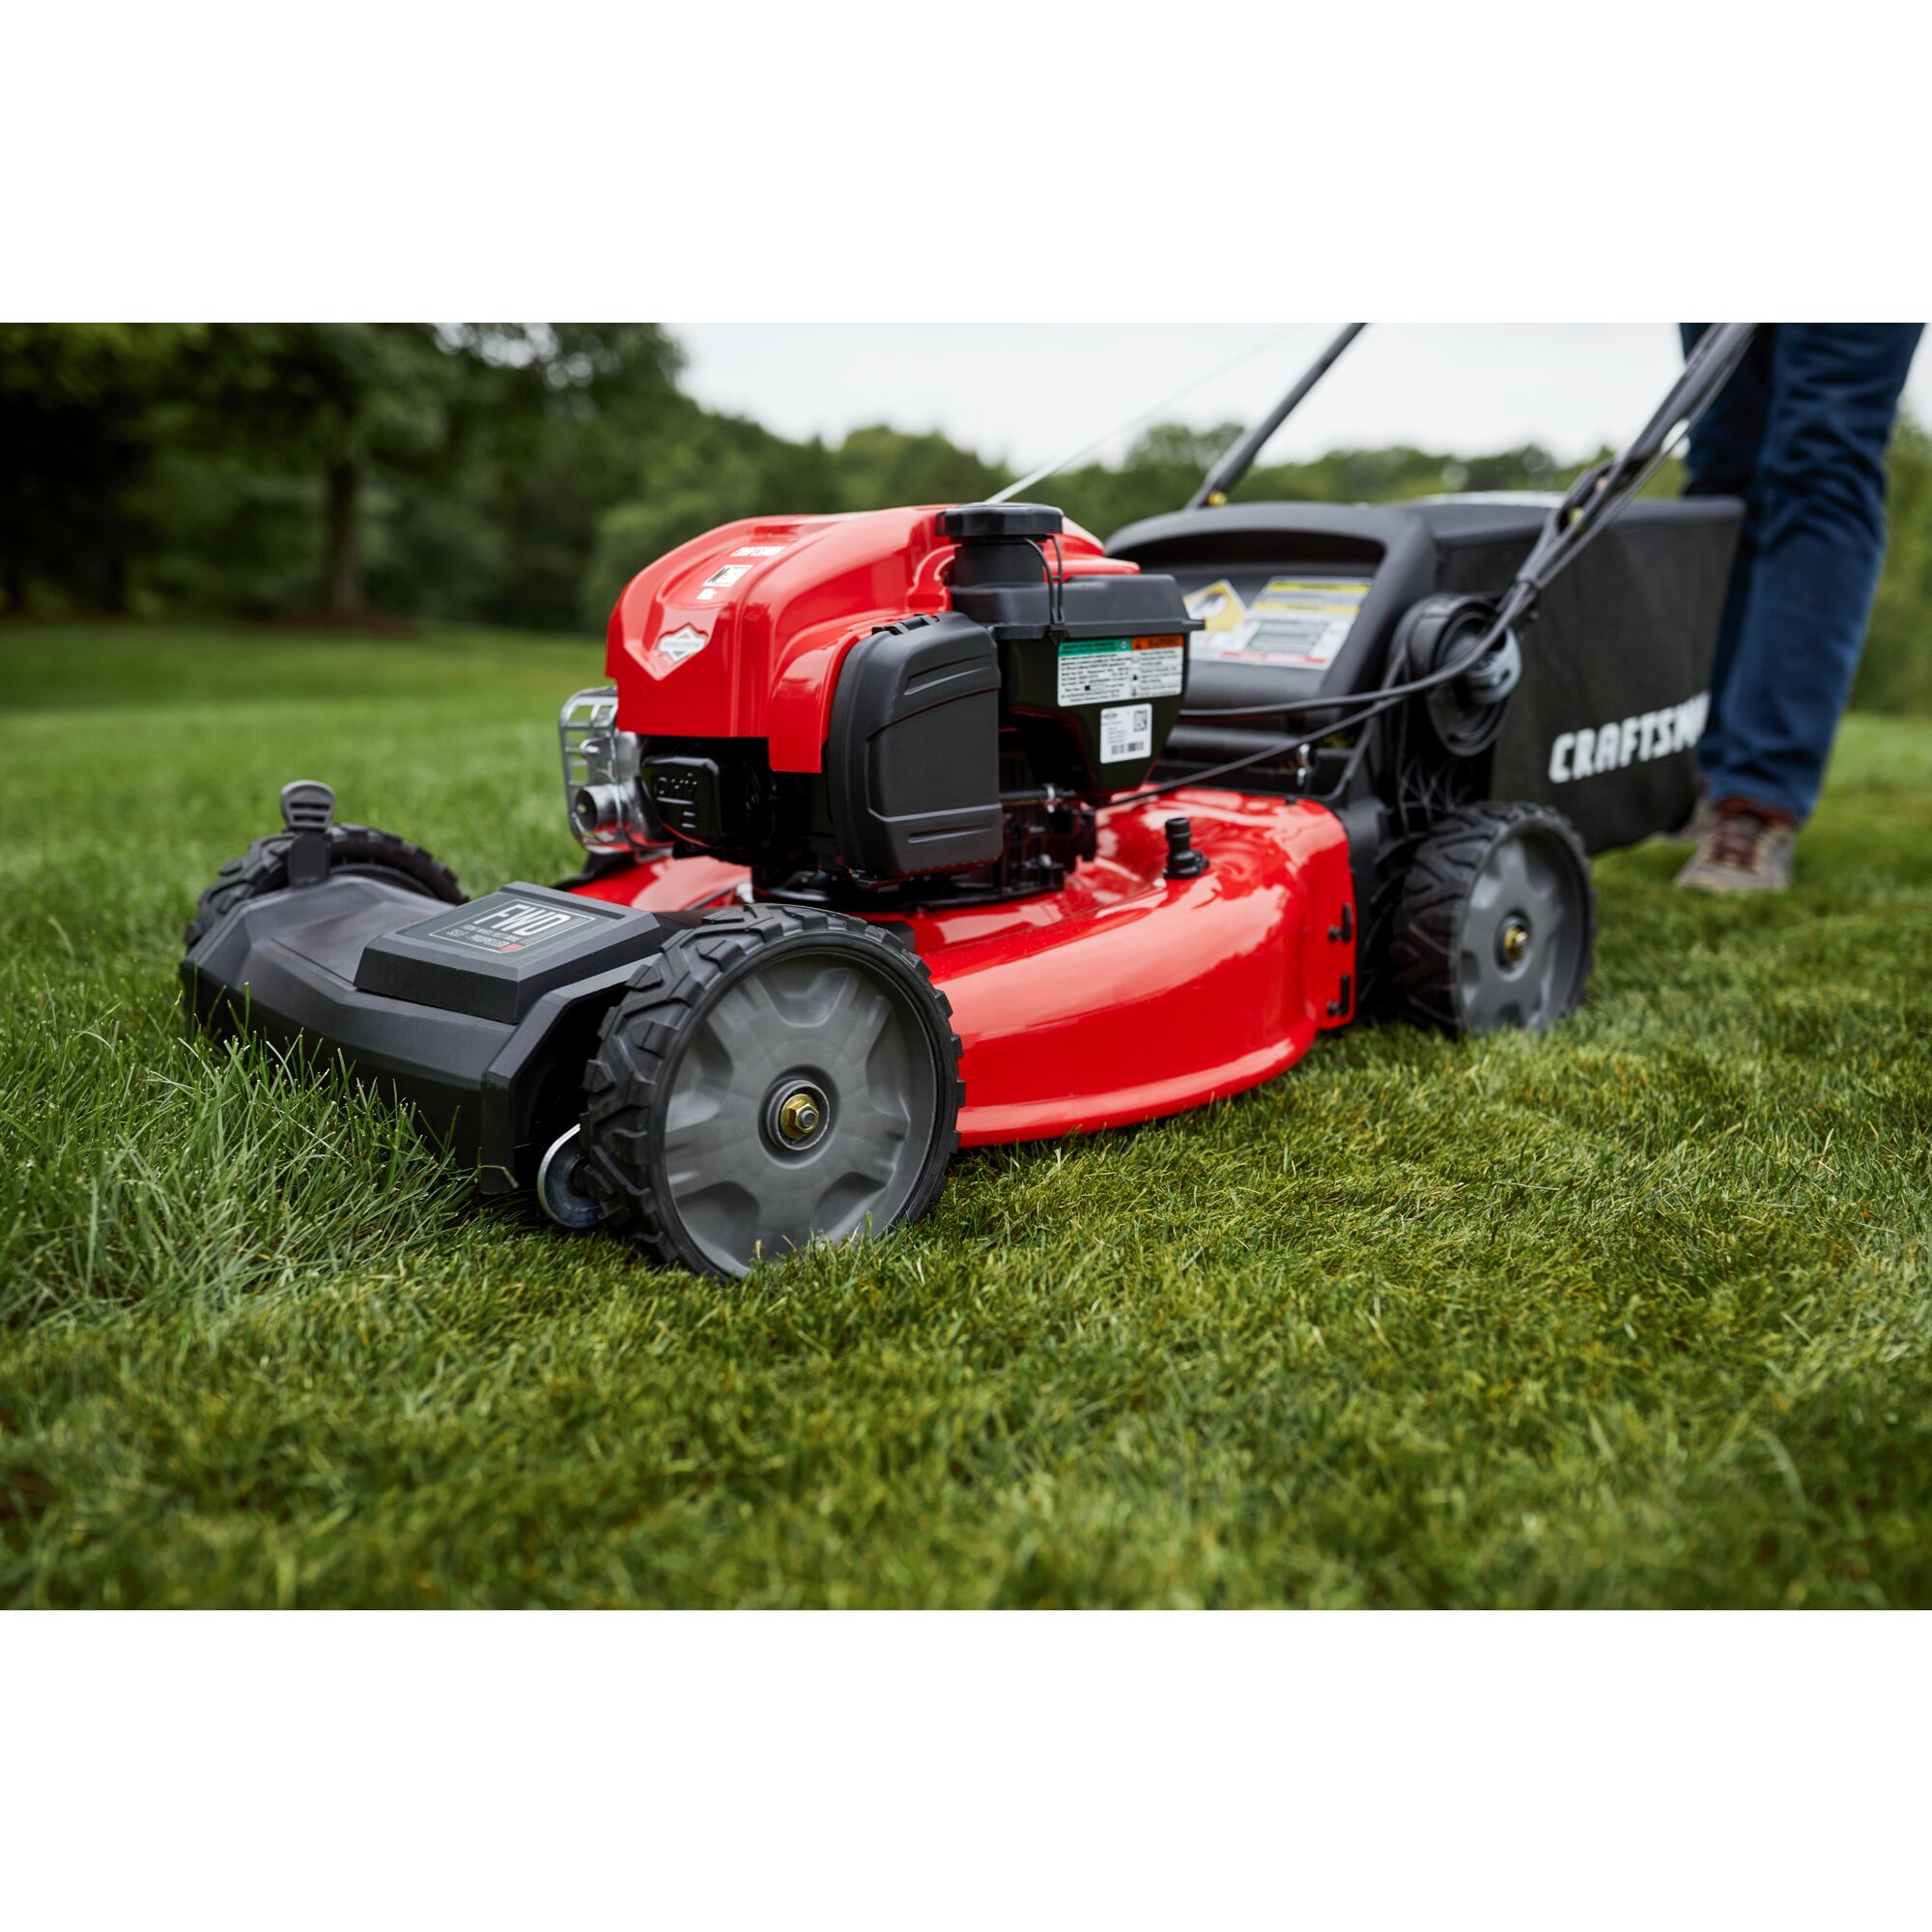 CRAFTSMAN M260 21-IN.163cc Fwd Self-Propelled Mower zoomed in mowing yard